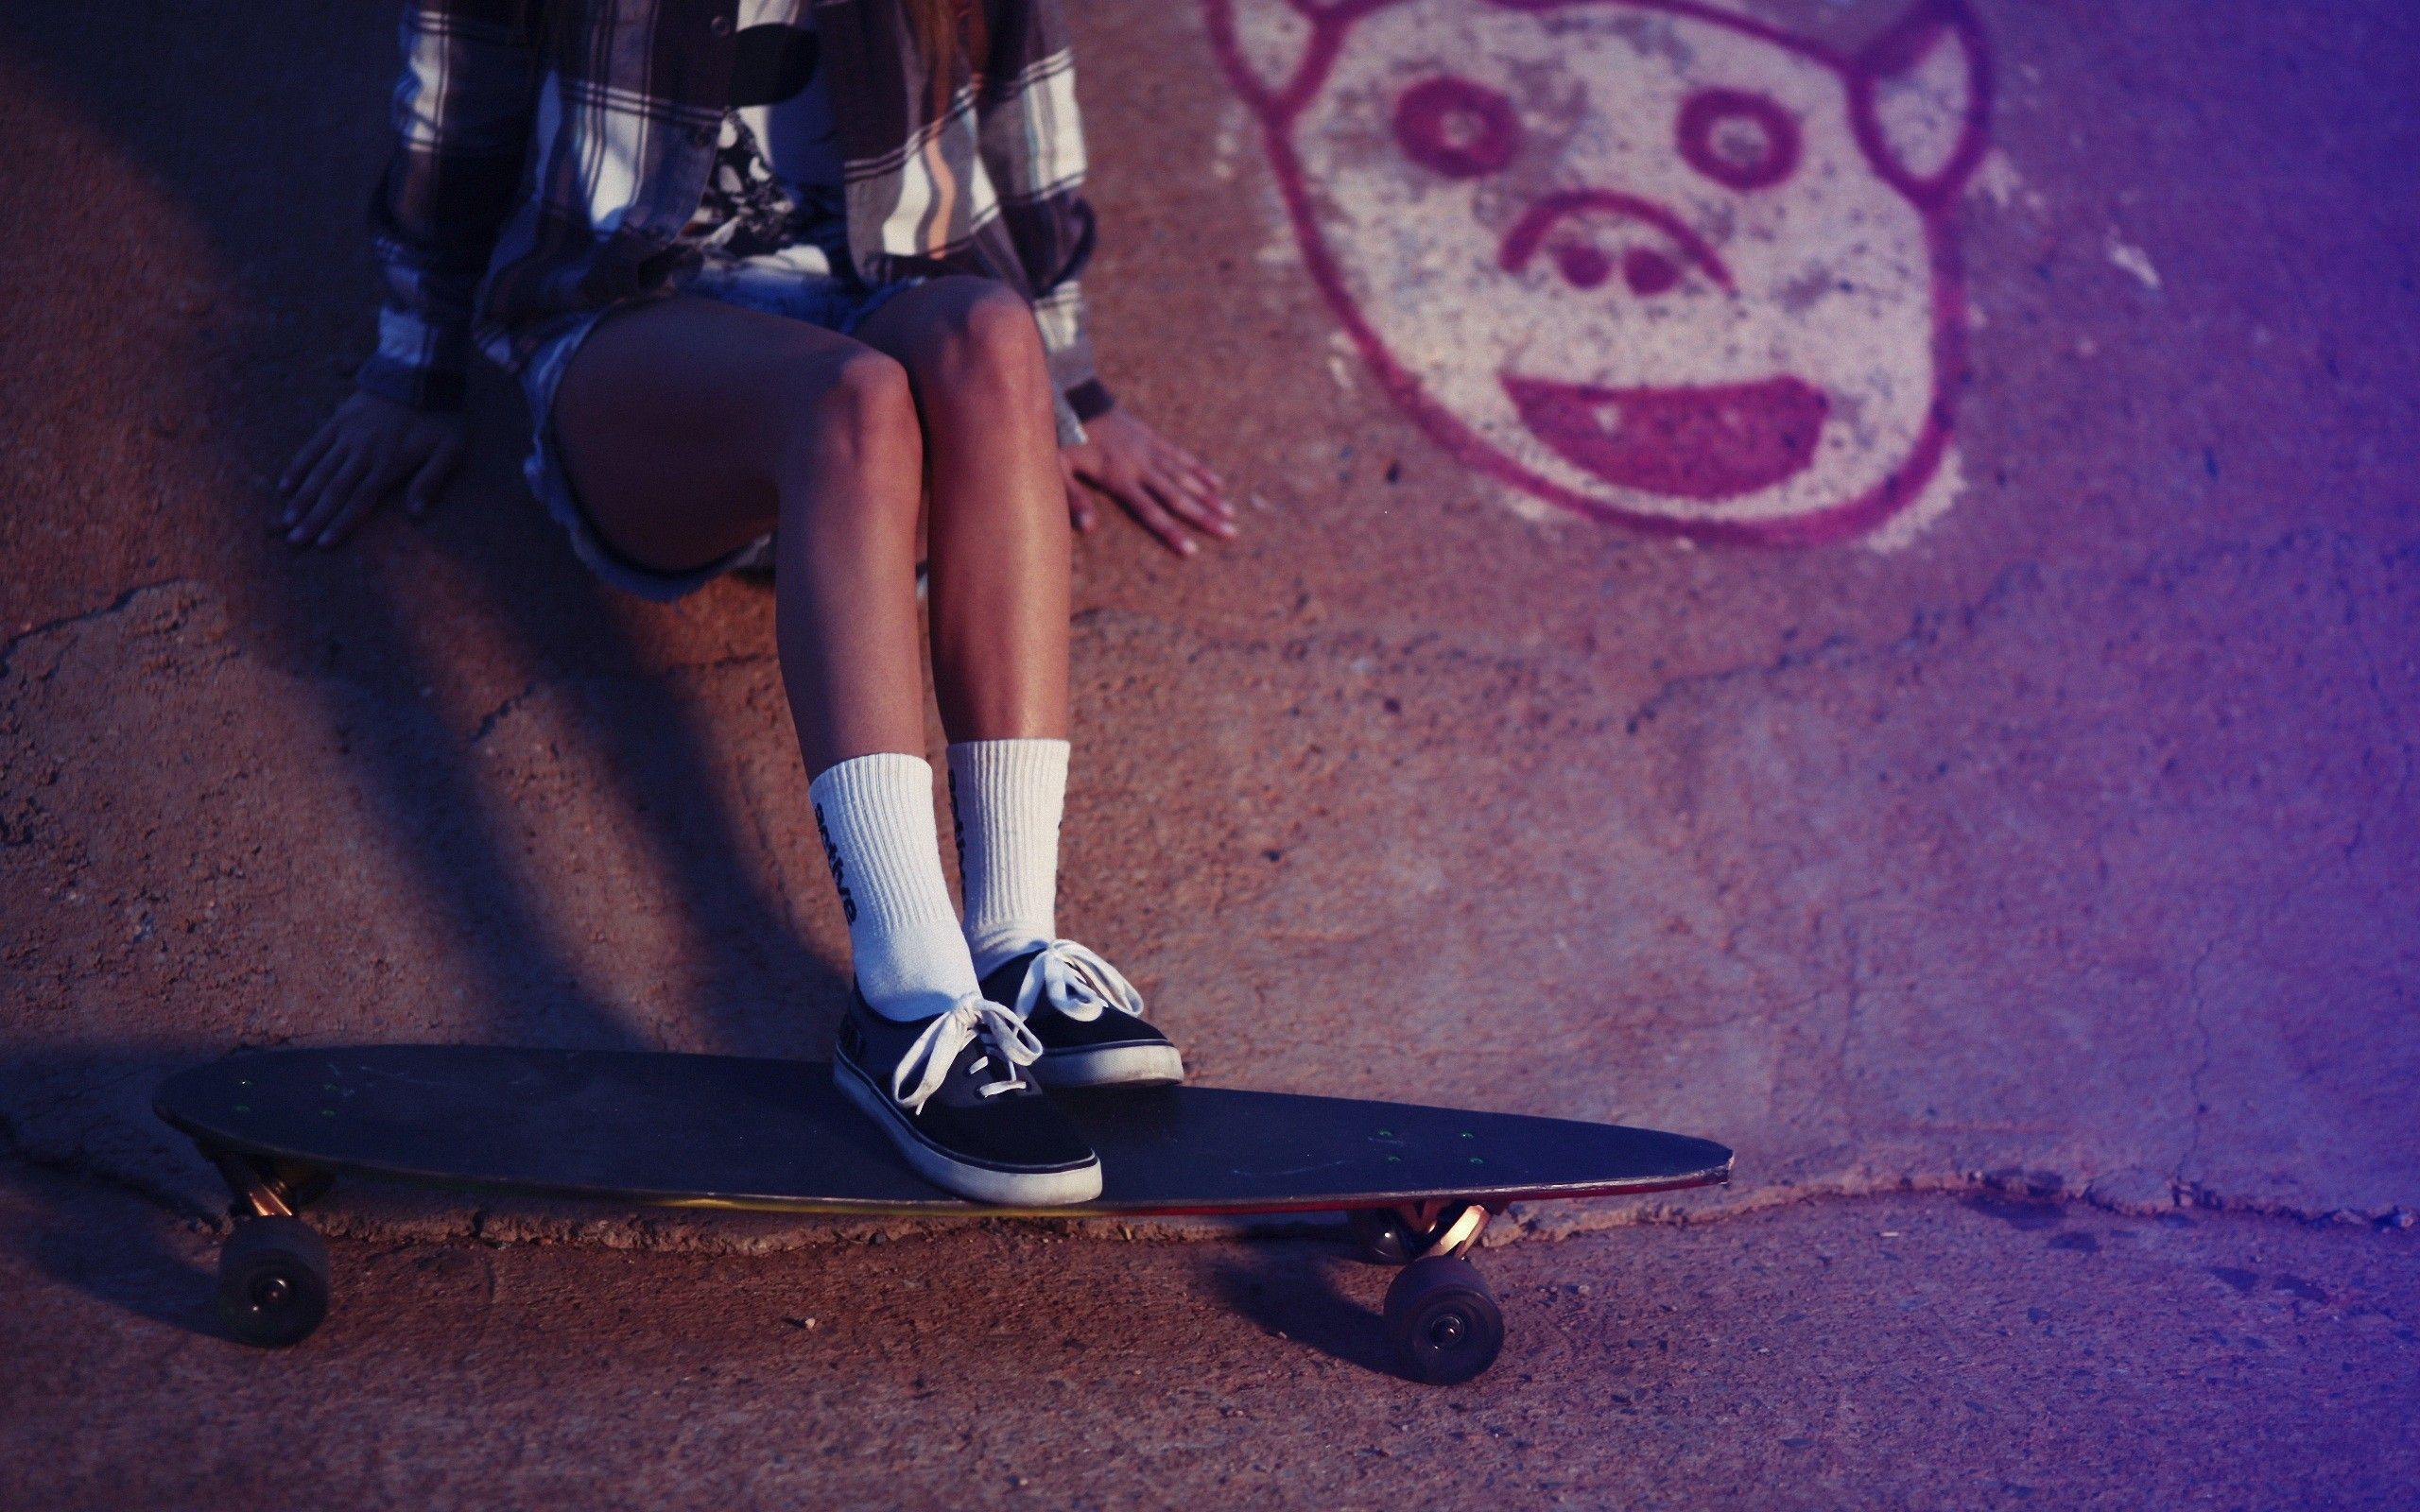 A person sitting on a skateboard with a monkey face painted on the wall behind them. - Skater